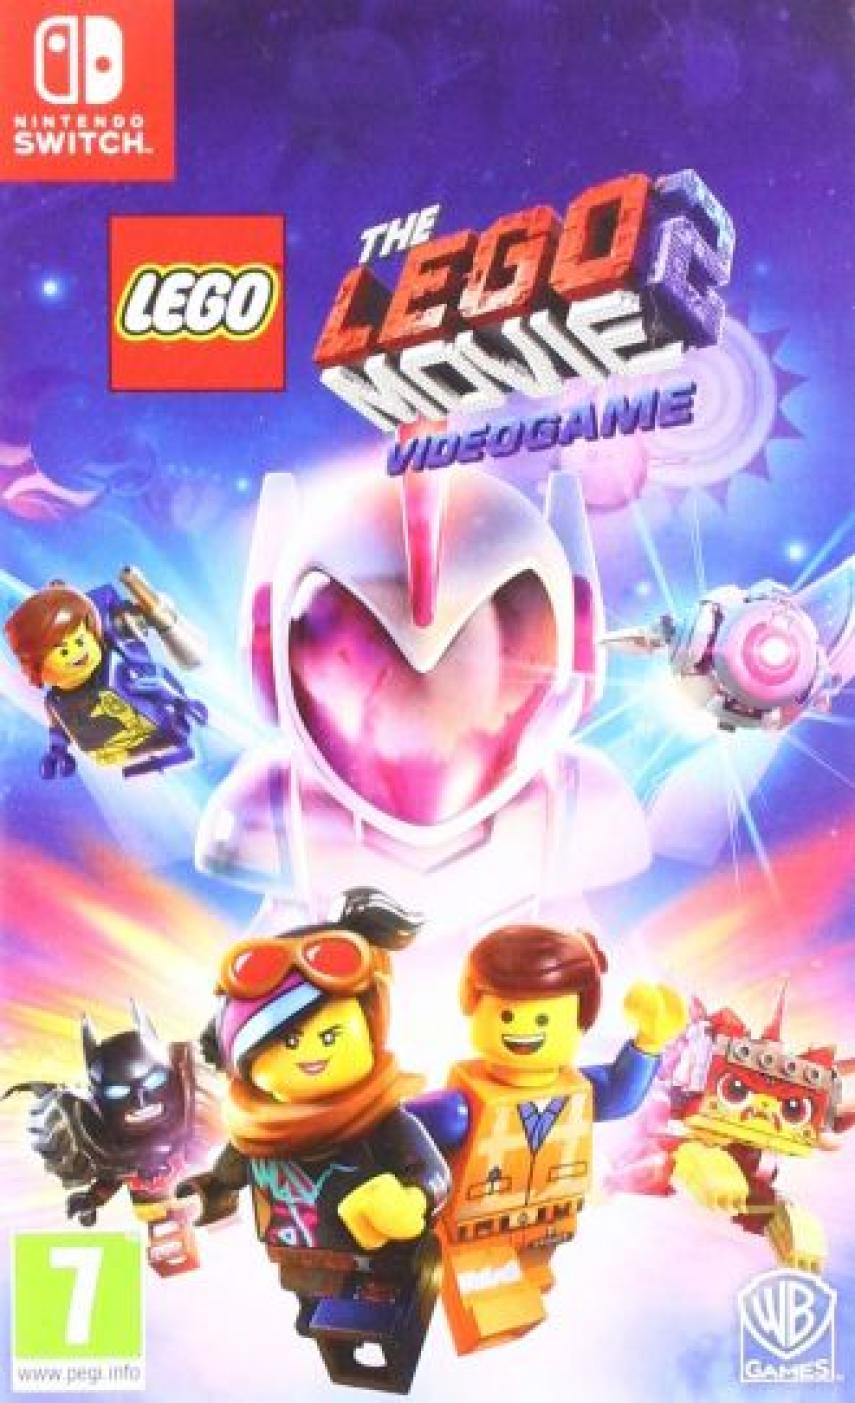 TT Games: The Lego movie 2 - videogame (Playstation 4)